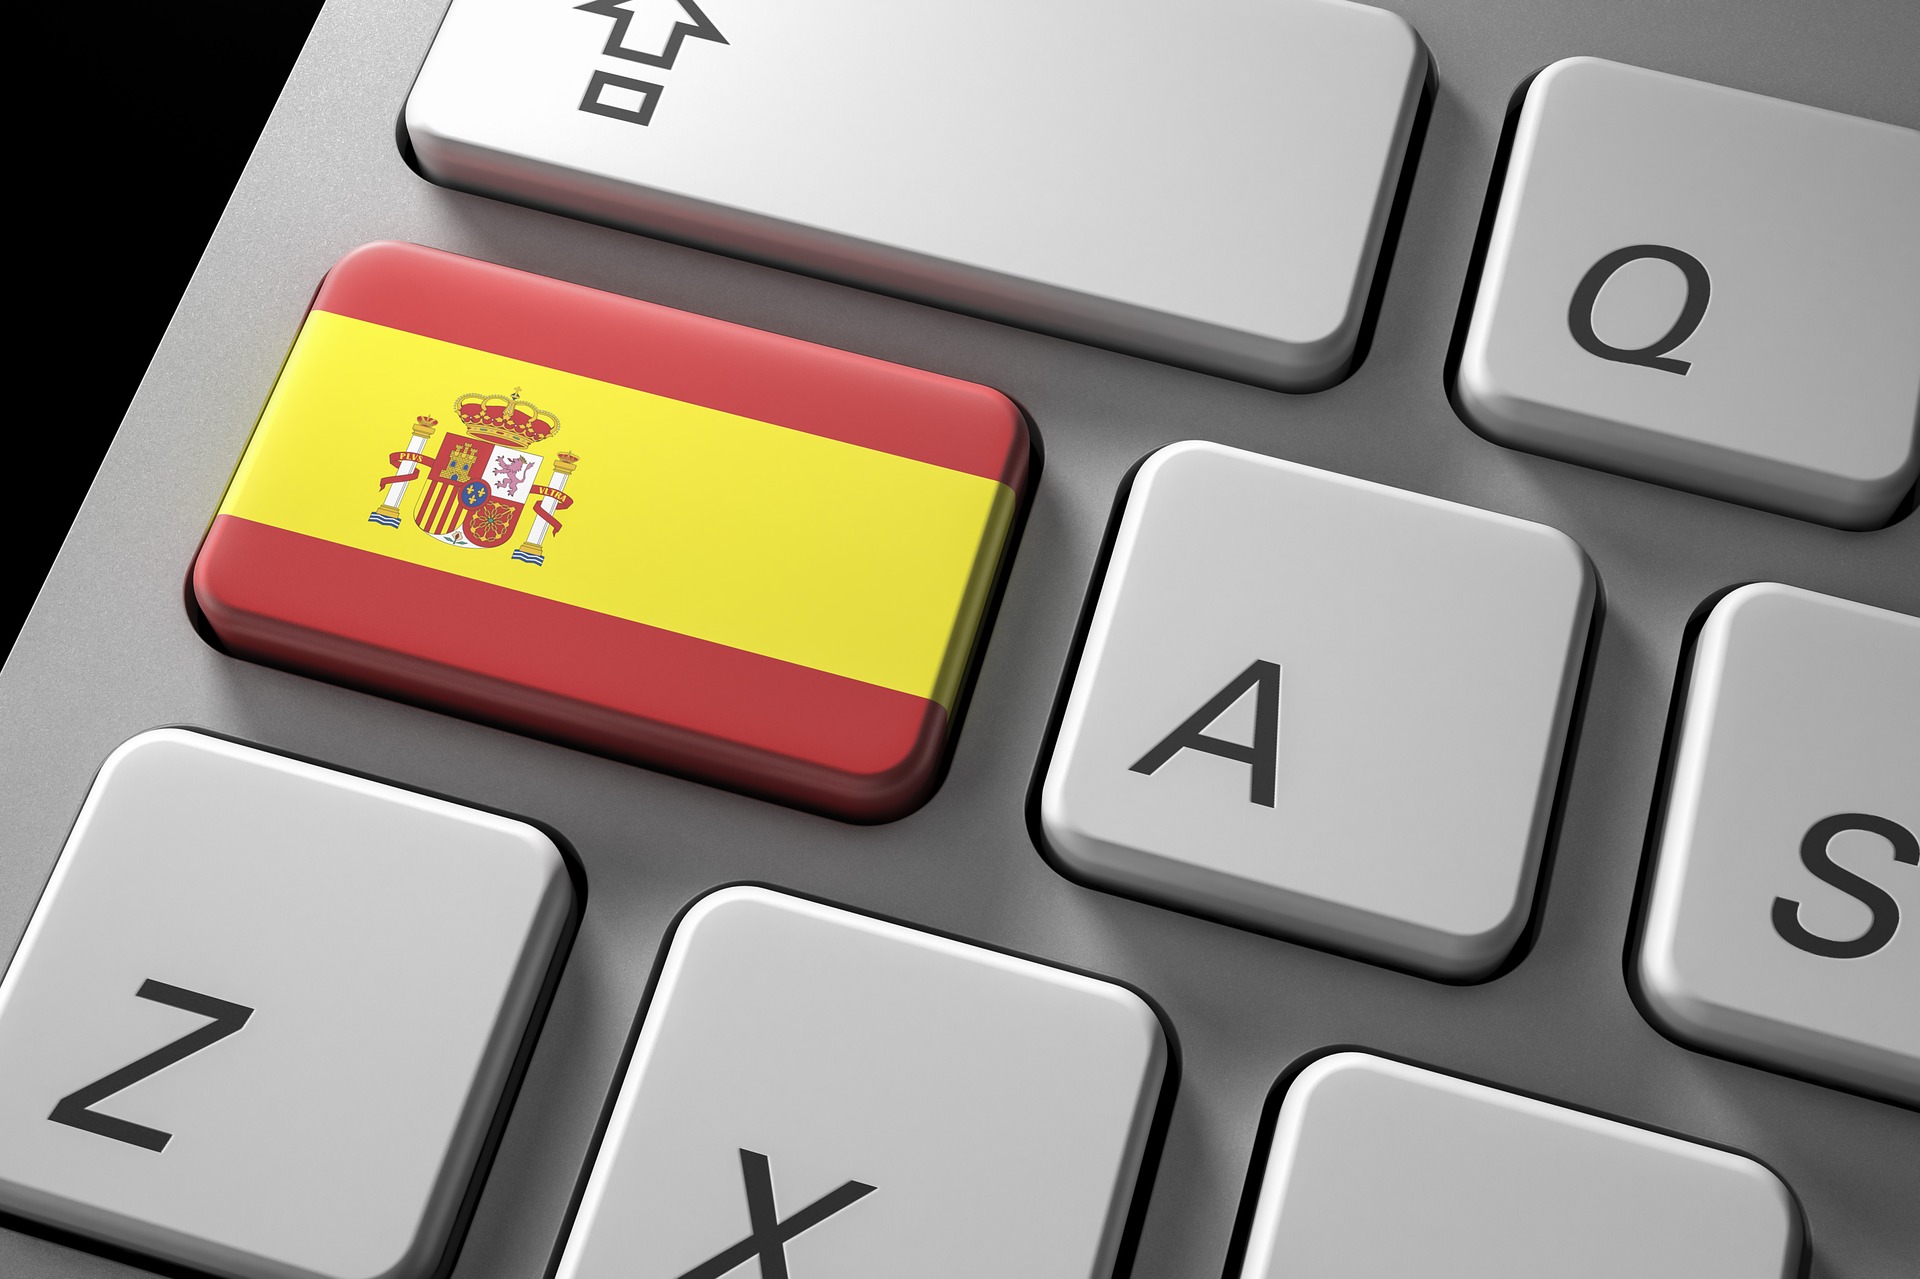 Telefónica launches it’s 5G Network in Spain